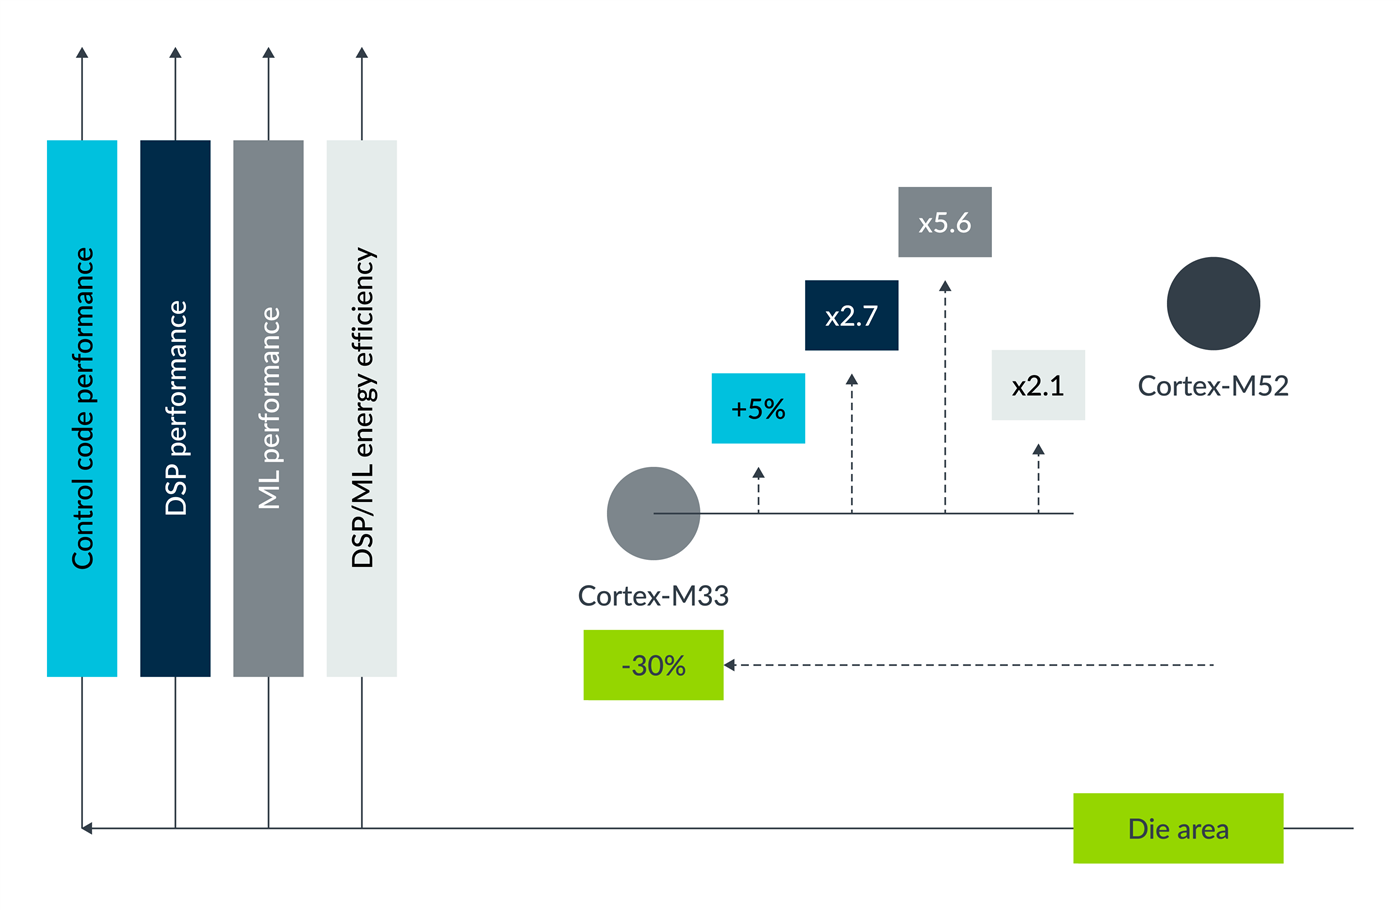 Balancing performance and area efficiency against Cortex-M33 and Cortex-M55